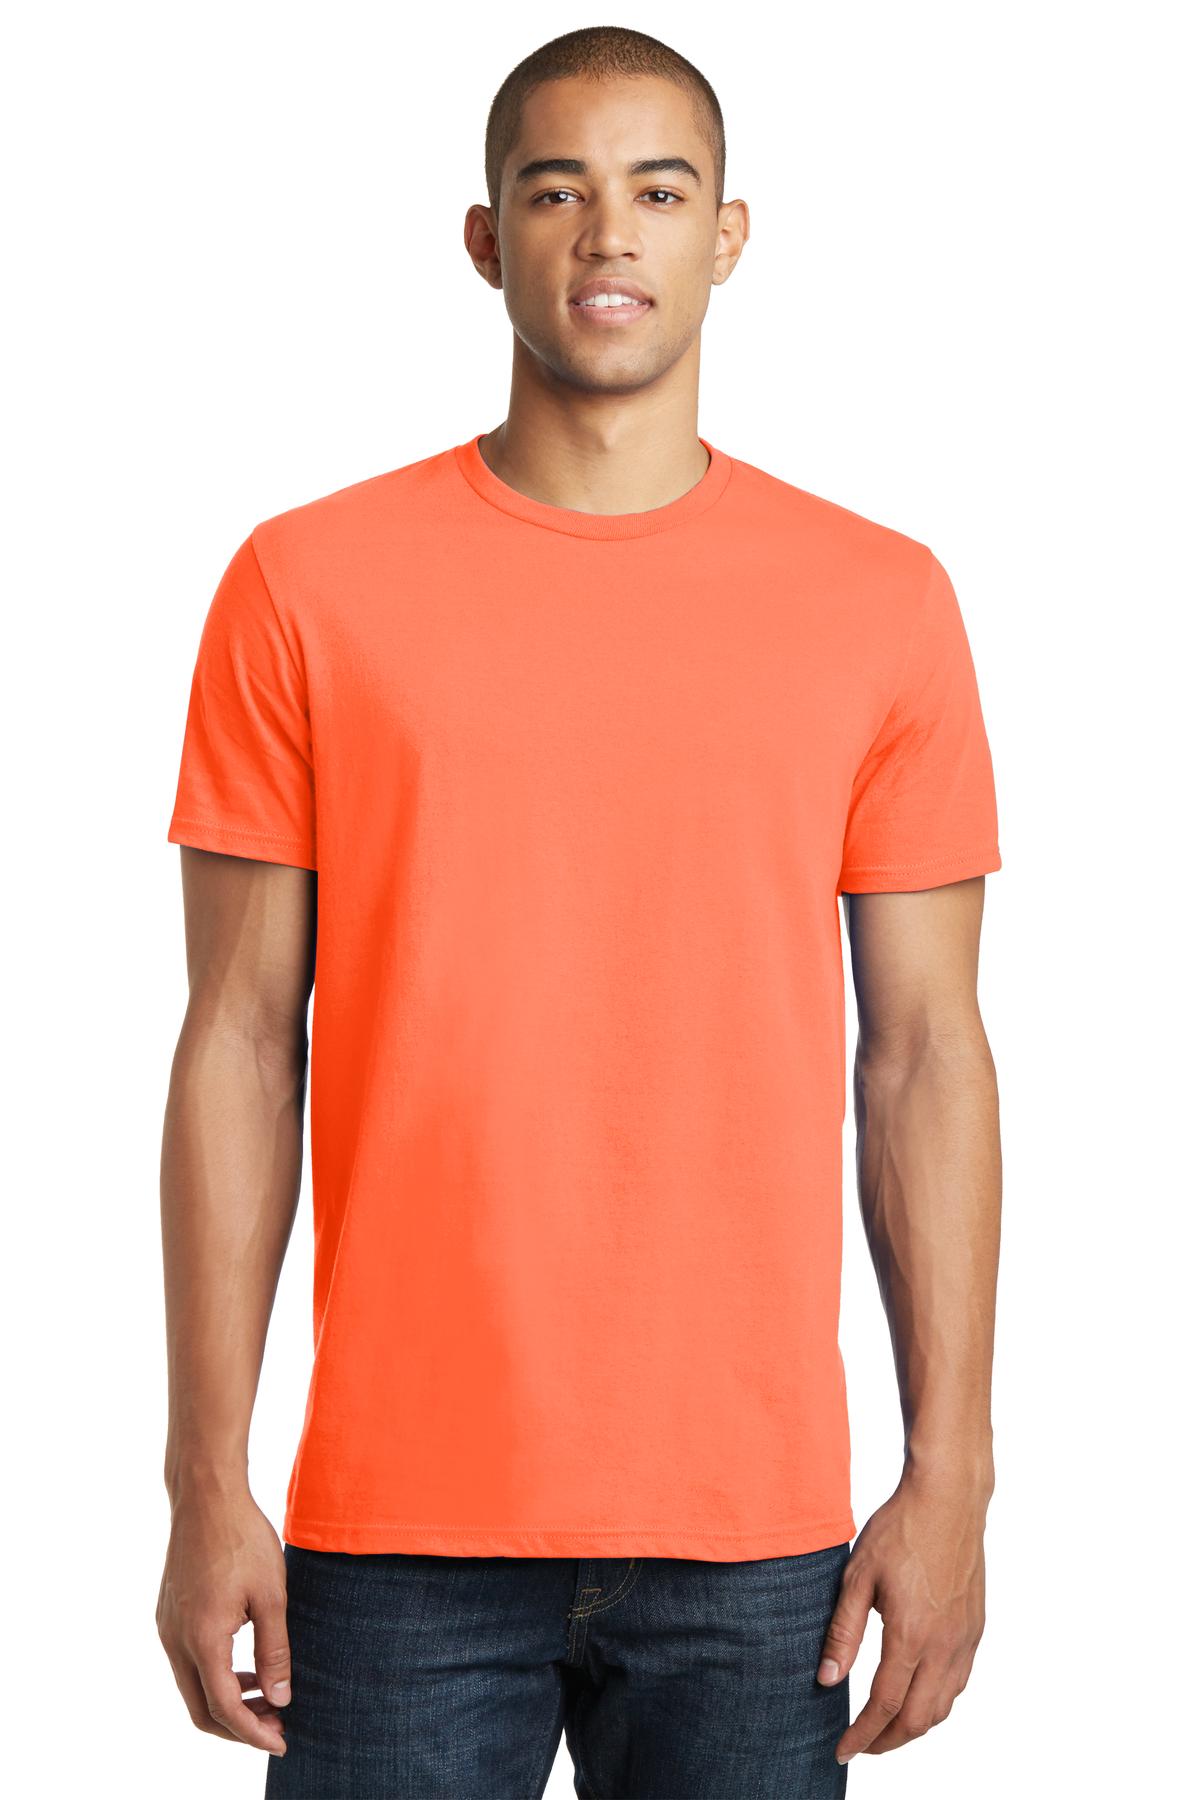 District Threads Young Mens Concert Tee. Neon Orange. XL. - image 1 of 4